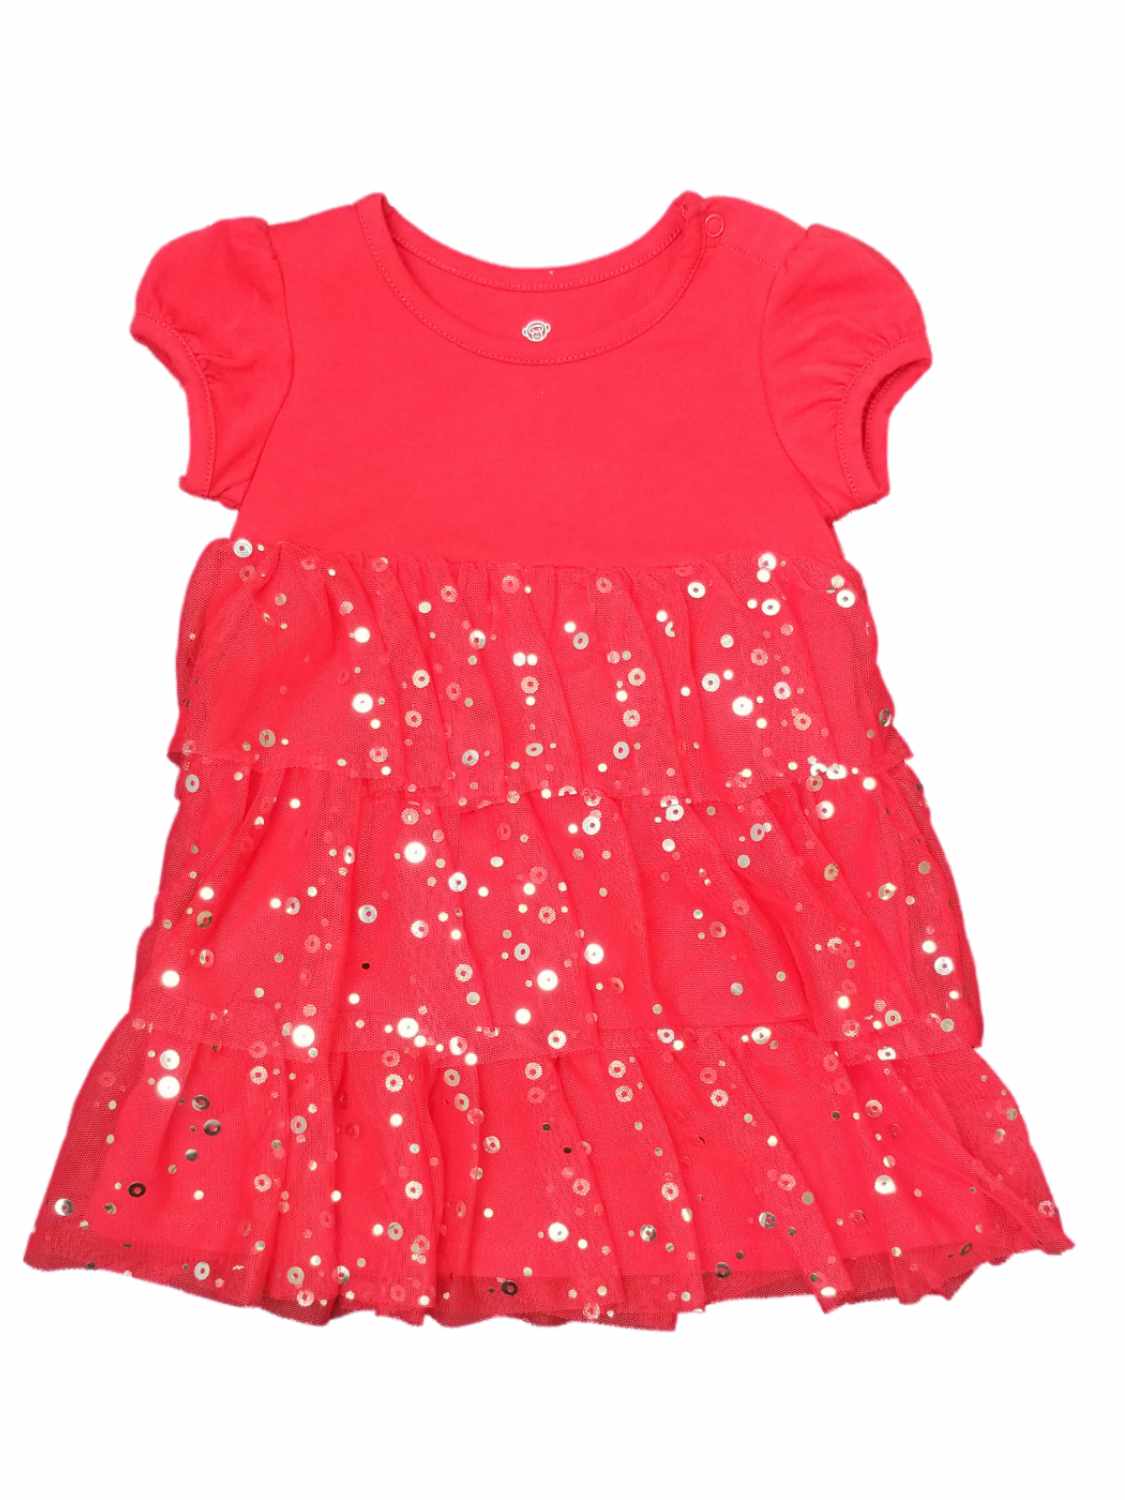 OKIDOKEYS Infant Baby Girls Red Silver Sparkle Ruffle Christmas Holiday Party Dress 18-24M